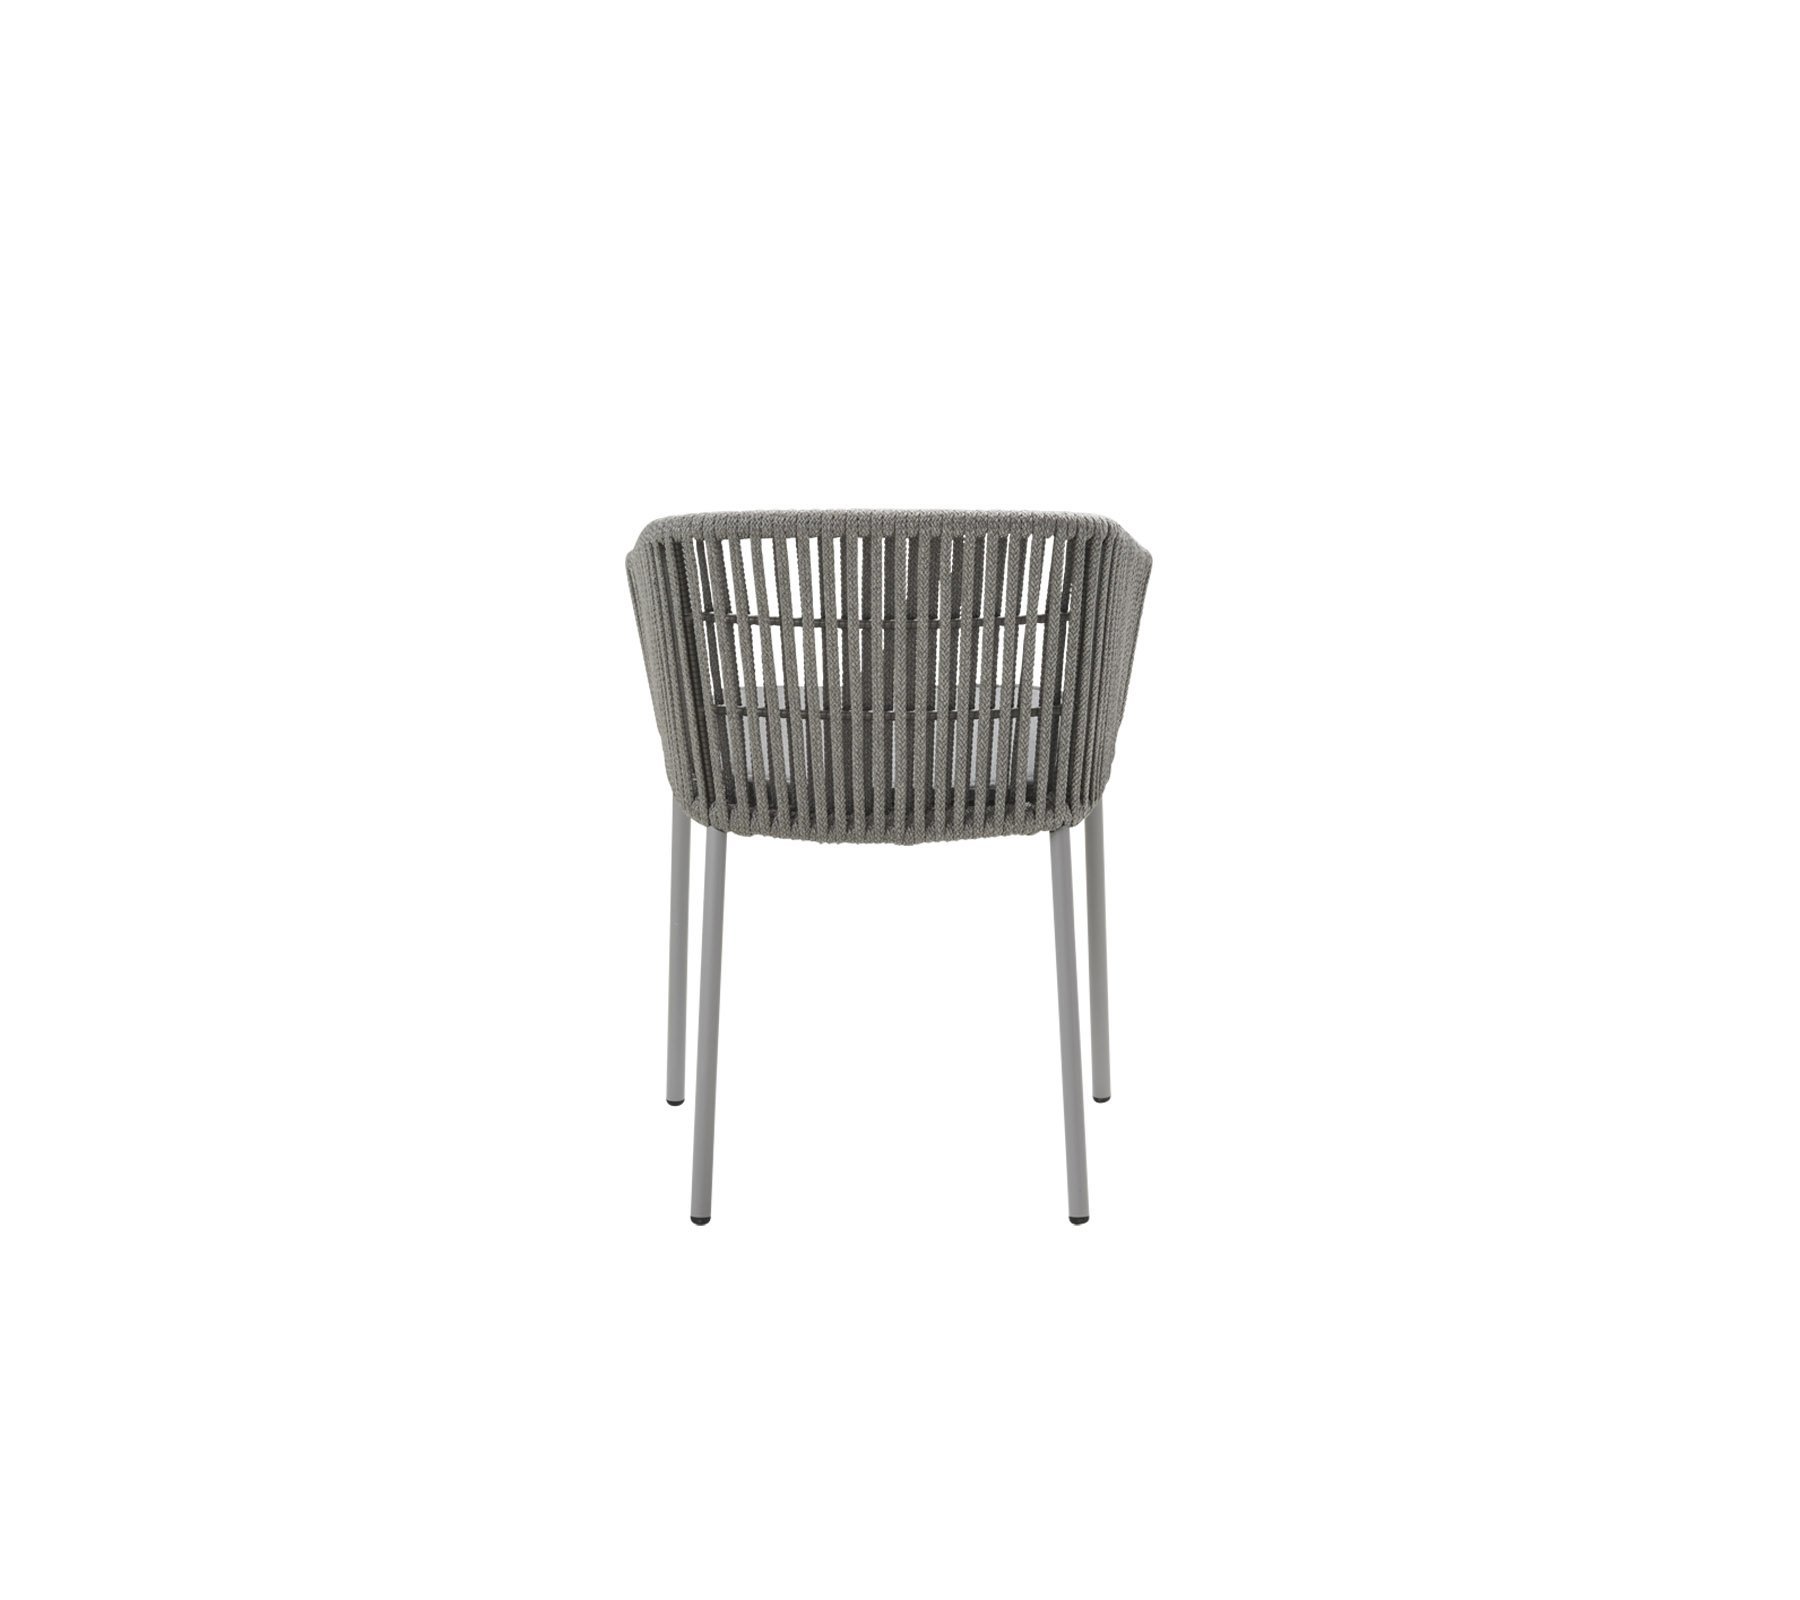 Moments Chair Stackable from Cane-line, designed by Foersom & Hiort-Lorenzen MDD